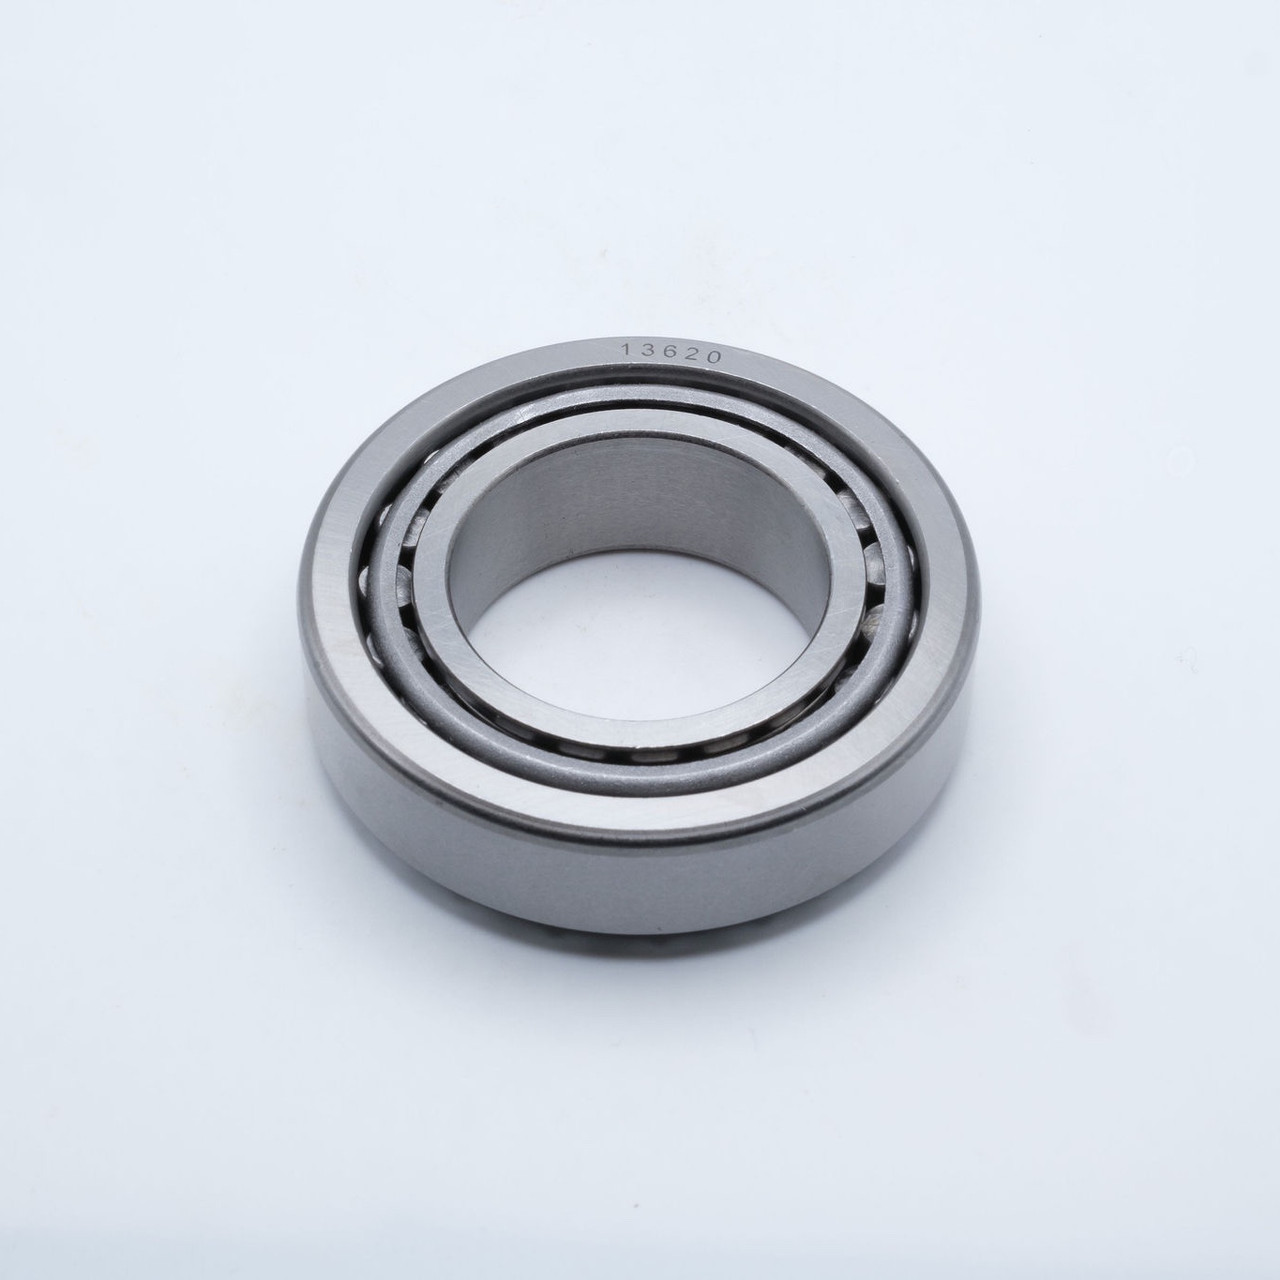 M12649/10 - A3 Taper Roller Bearing Set Front View